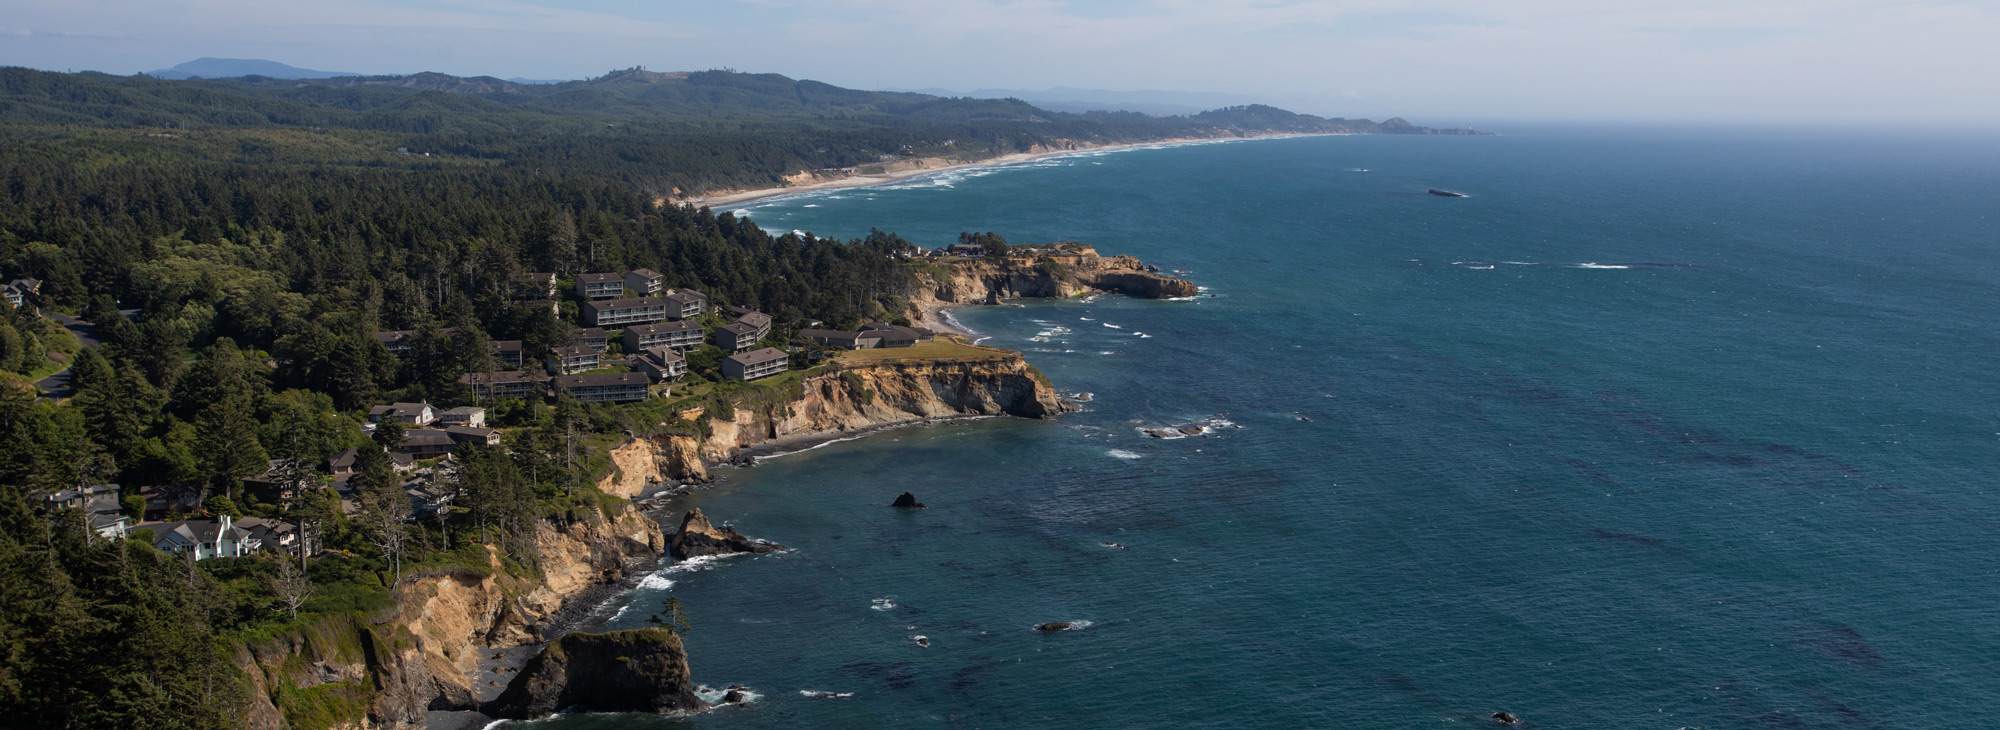 HERO_city-page_Otter_Rock_Otter_Crest_State_Scenic_Viewpoint.jpg